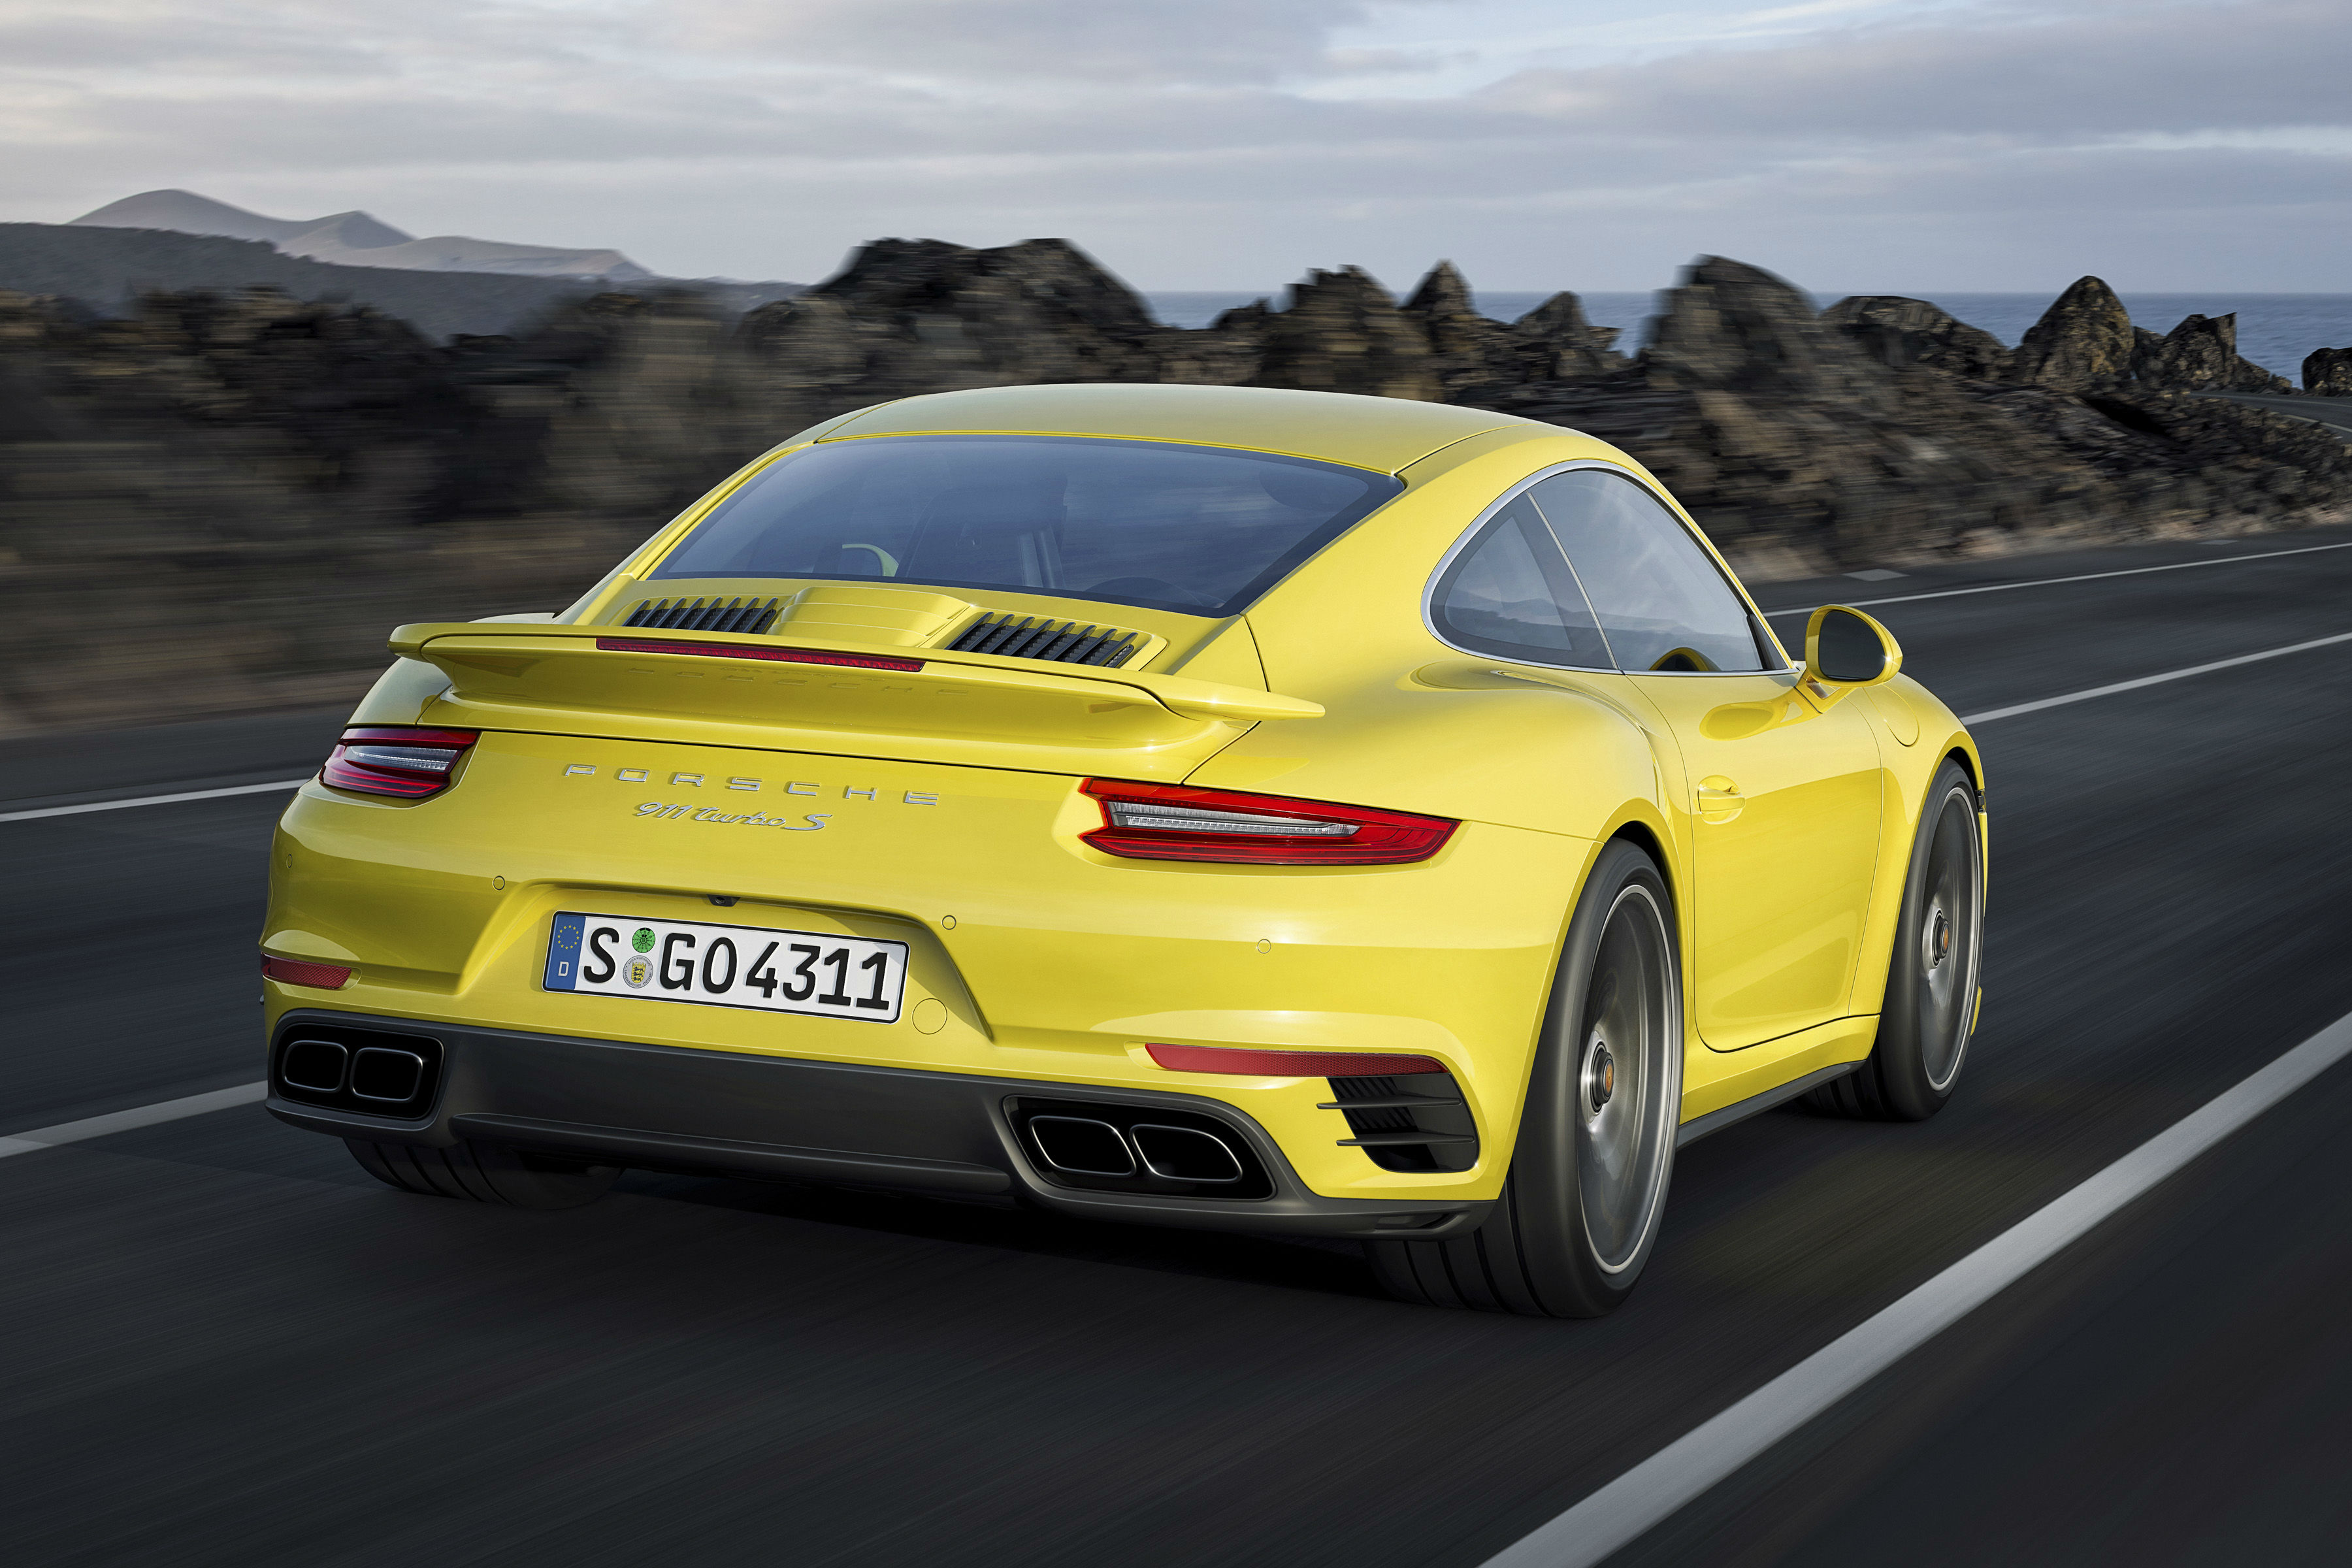 Review of the Porsche 911 Turbo S 2016